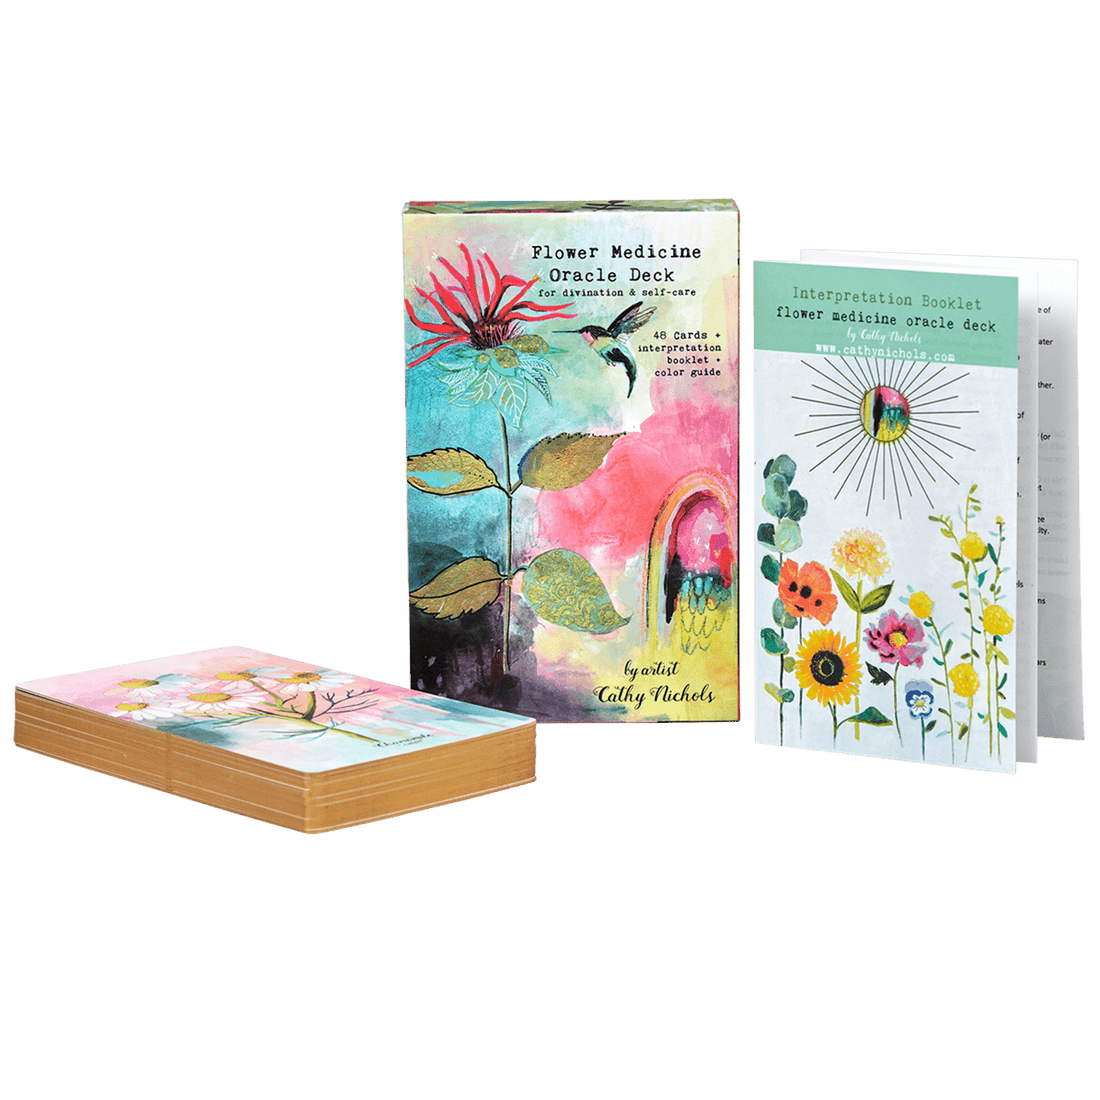 Flower Medicine Oracle Deck by Cathy Nichols. Front of deck along with guidebook